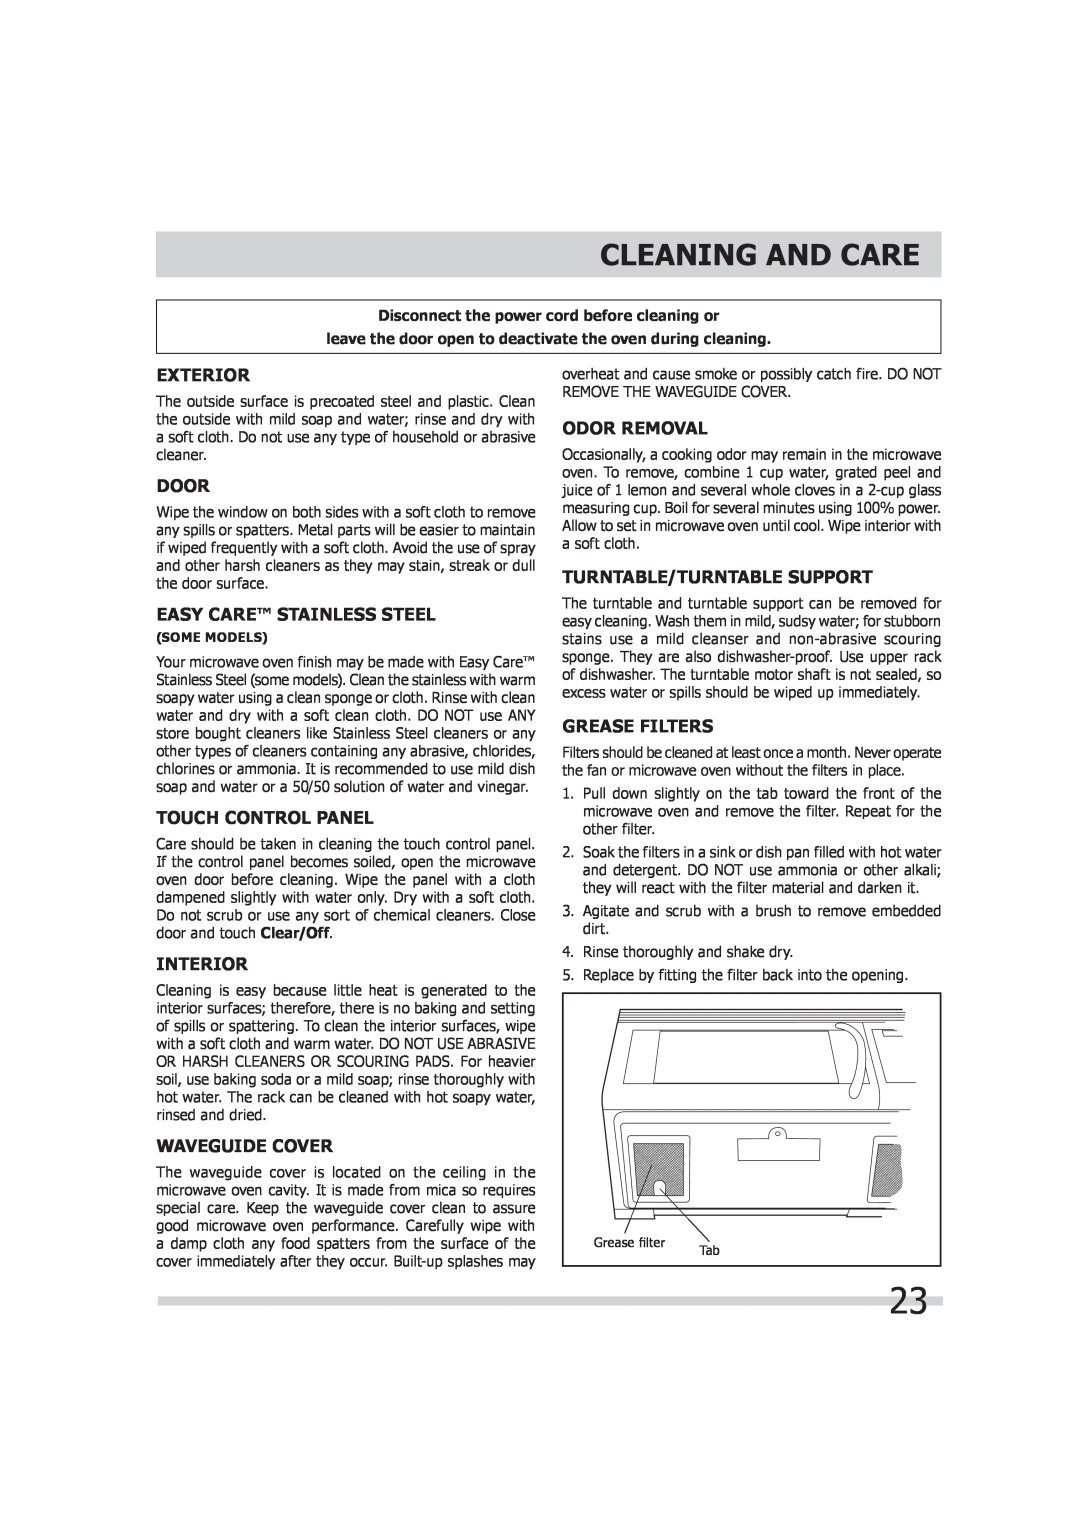 Frigidaire 316902449 Cleaning And Care, Exterior, Door, Easy Care Stainless Steel, Touch Control Panel, Interior 